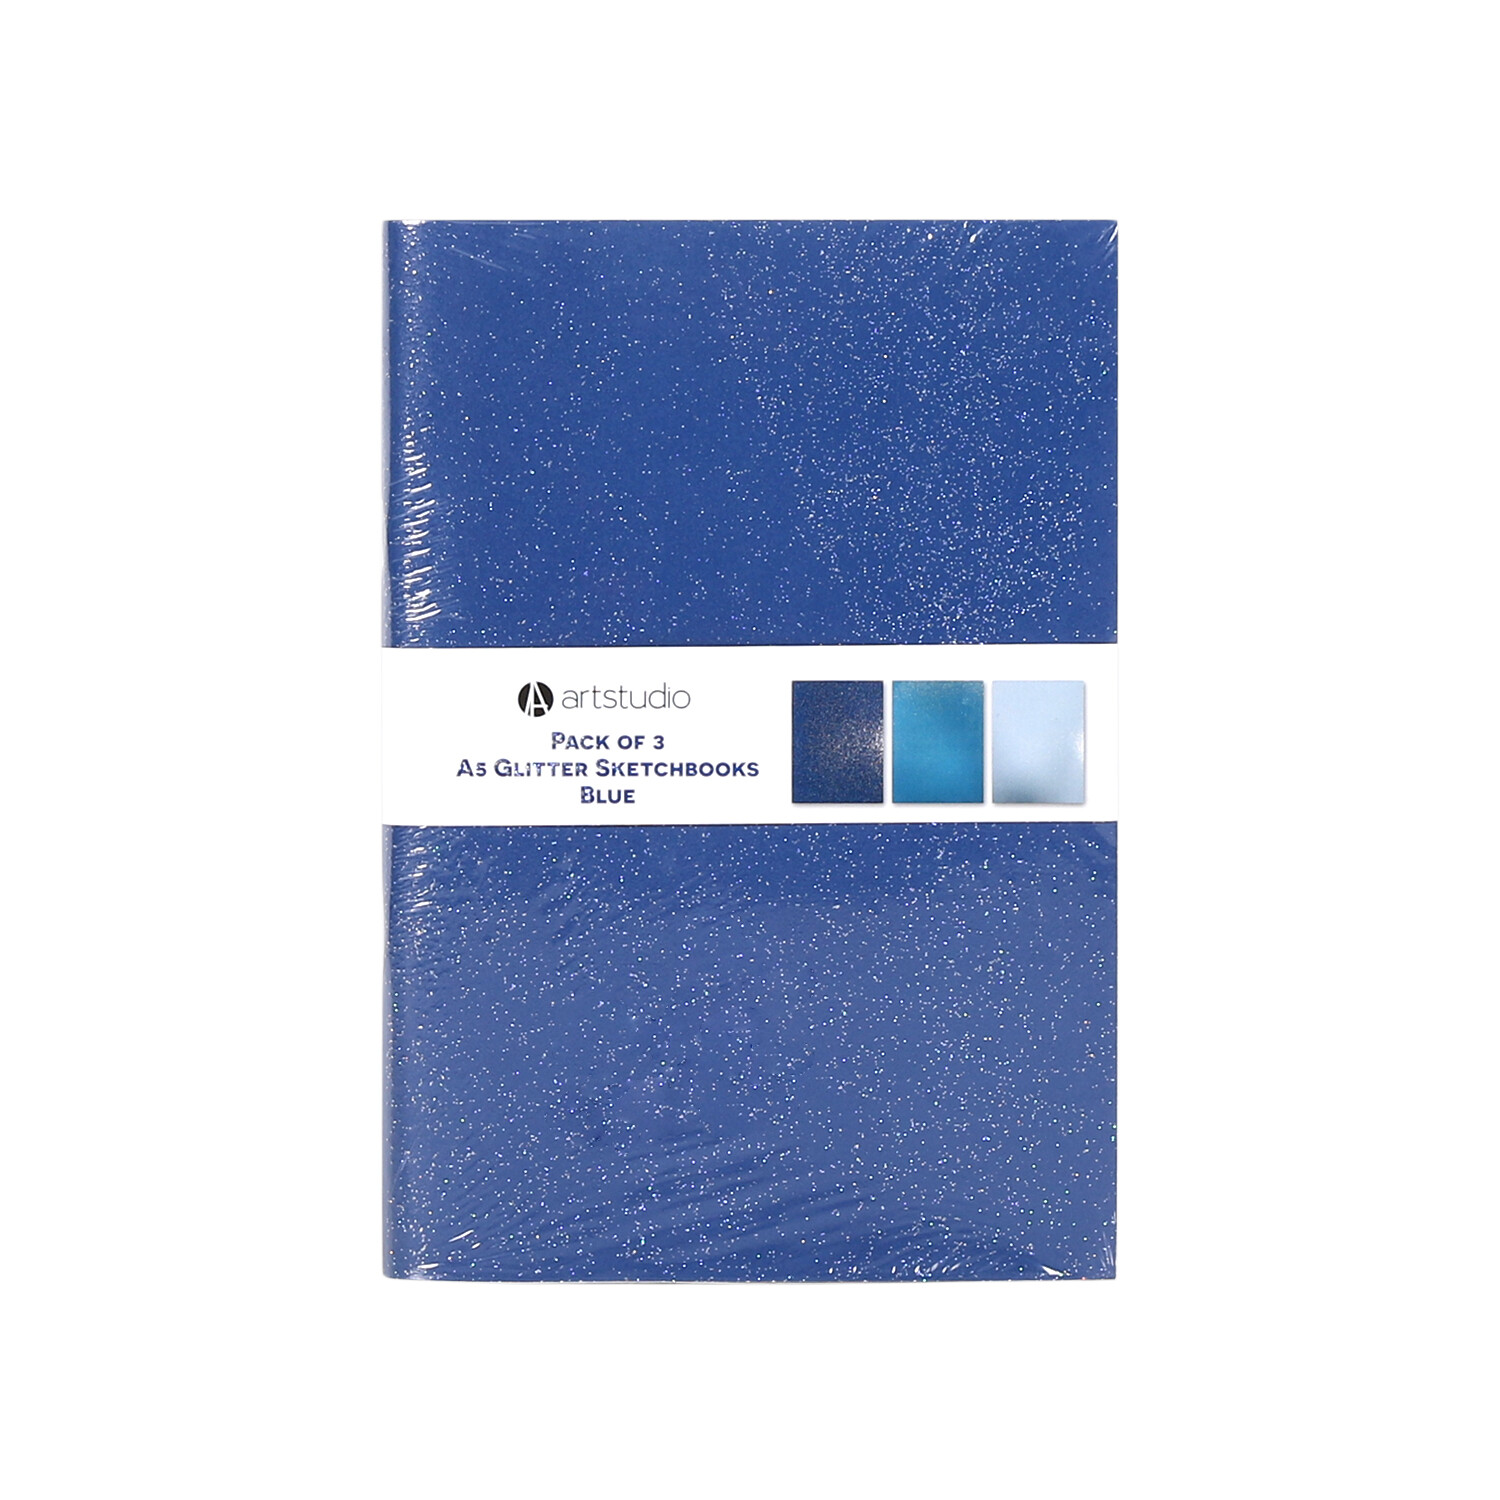 Pack of Three A5 Glitter Sketchbooks - Blue Image